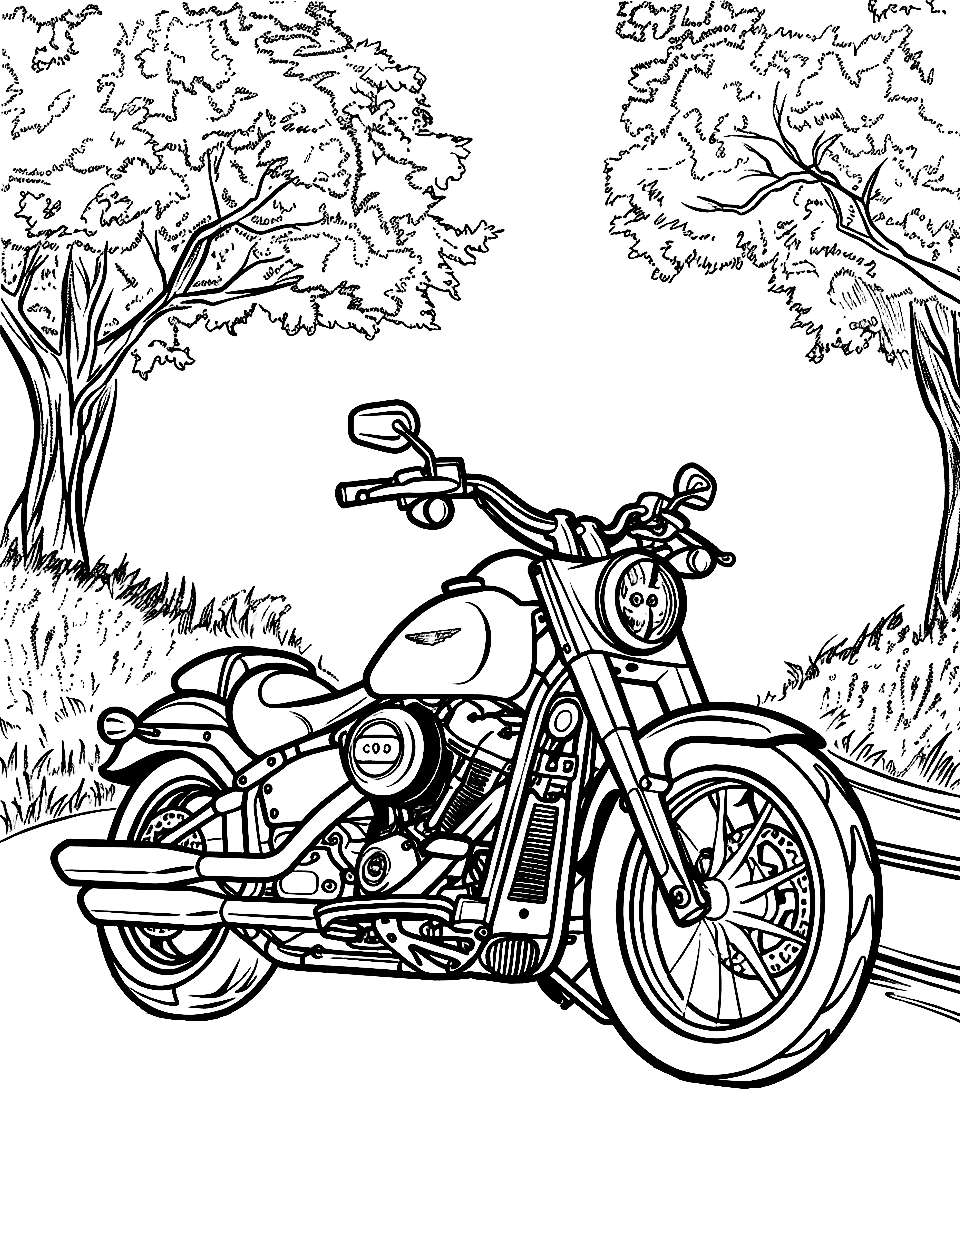 Peaceful Motorcycle Ride Coloring Page - A motorcycle parked on a quiet country road, with trees on either side.